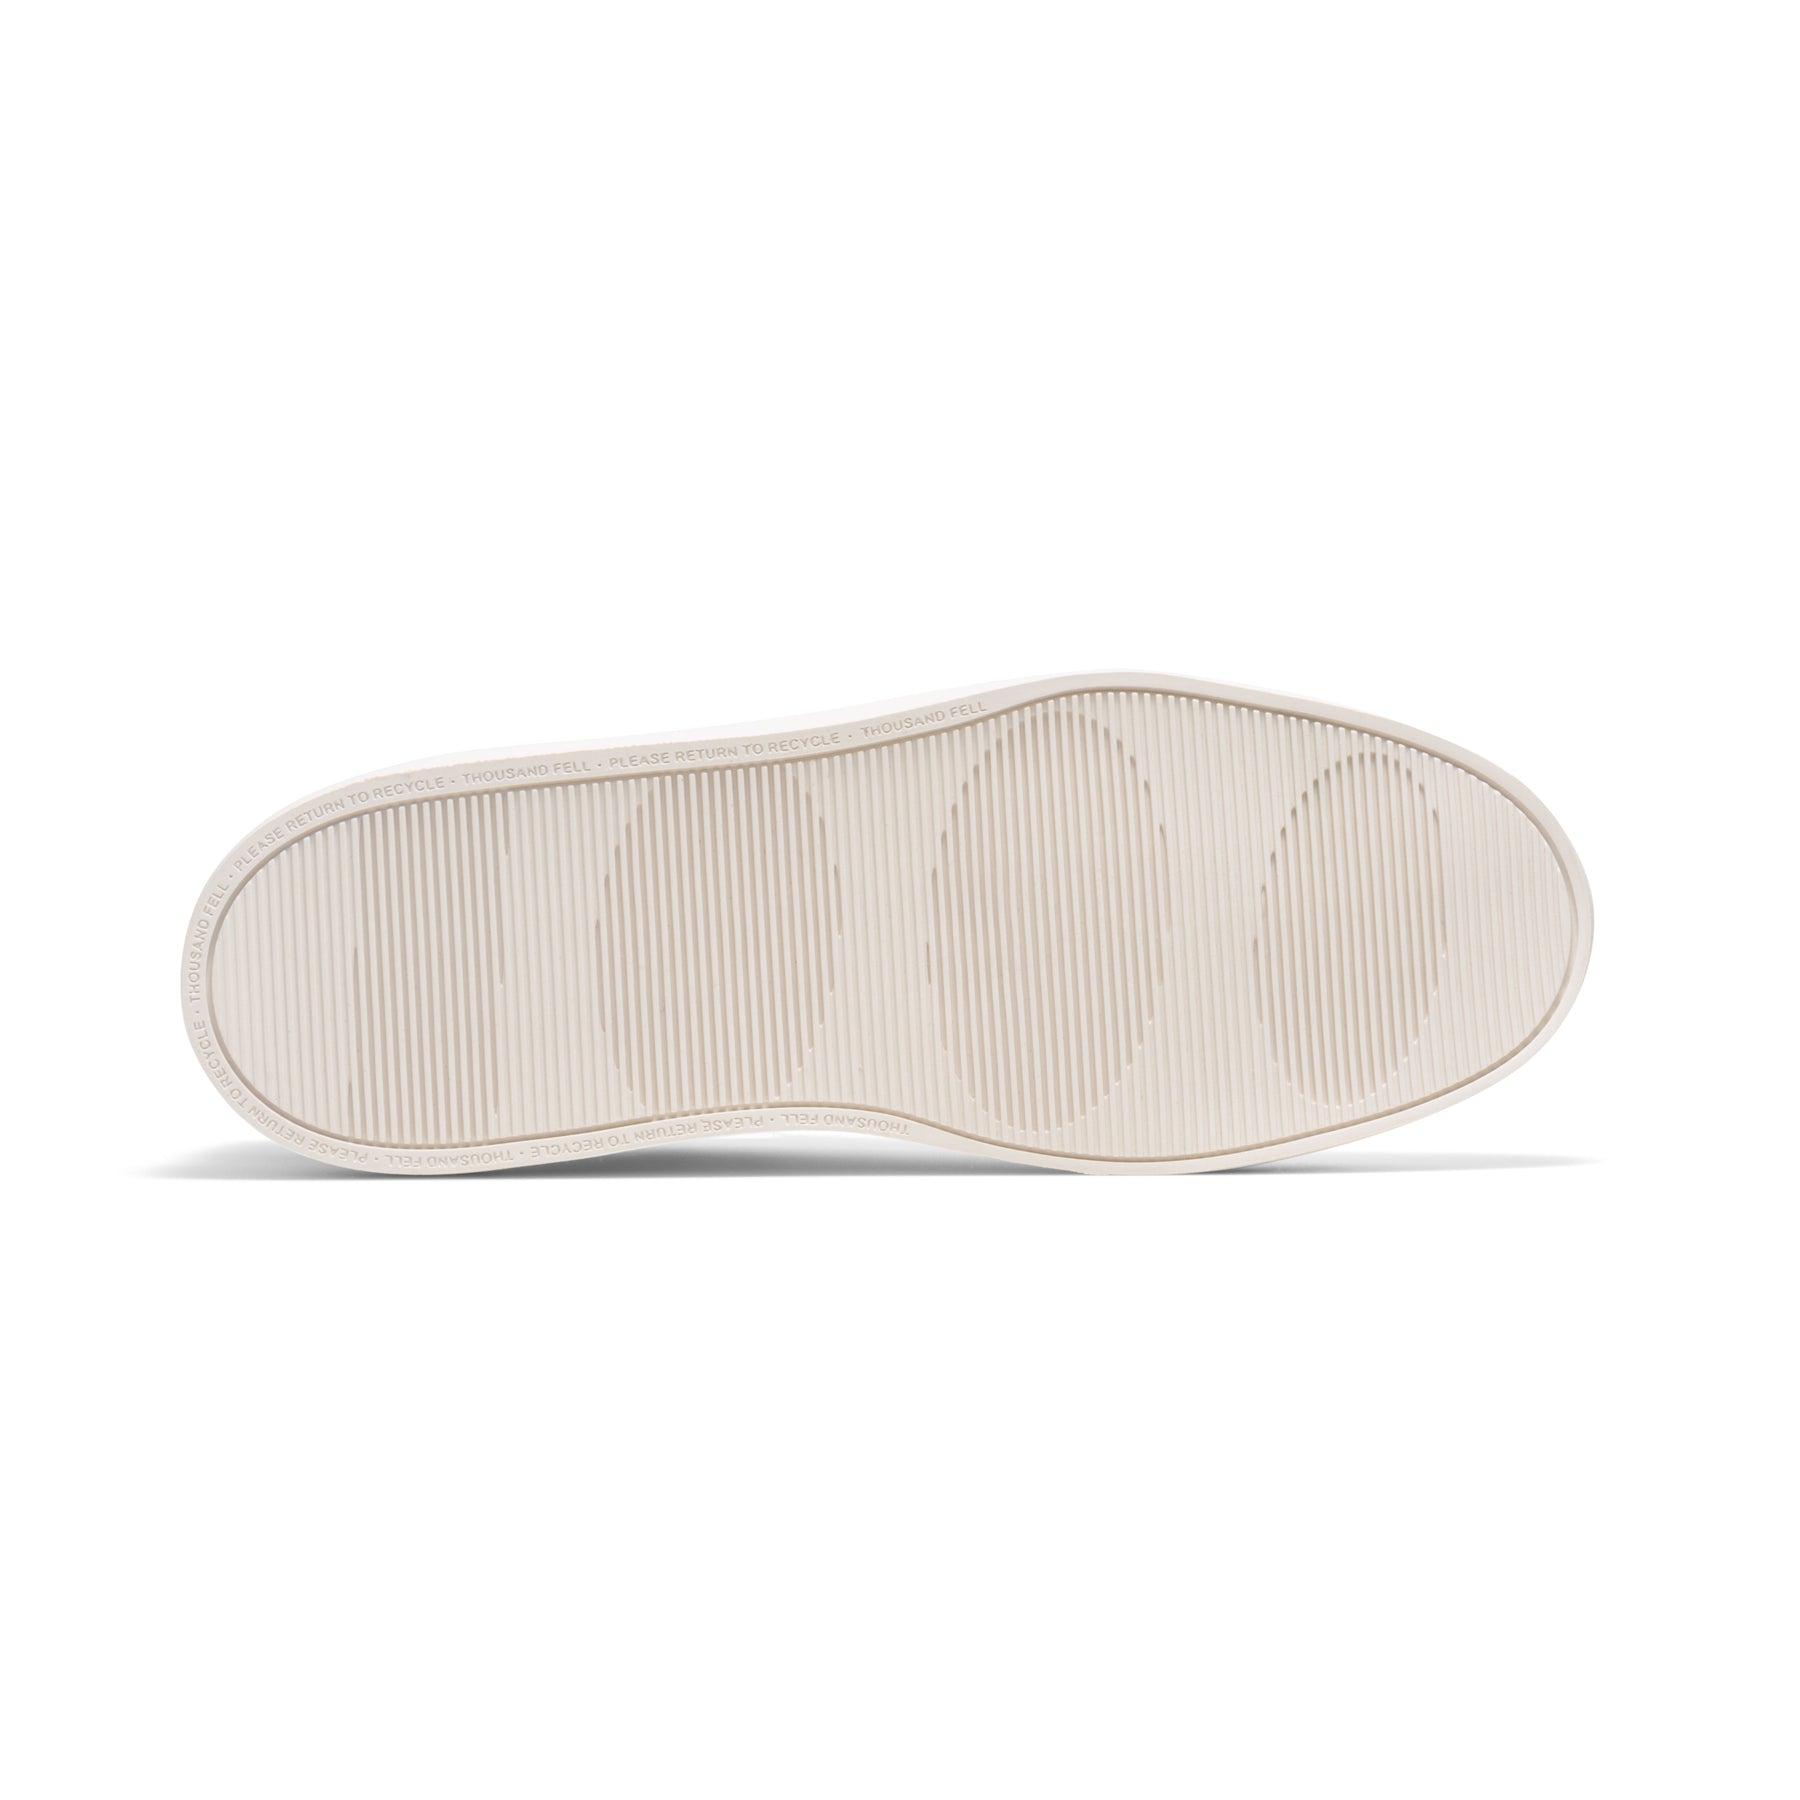 white sole of sustainably made sneakers featuring zero waste innovation